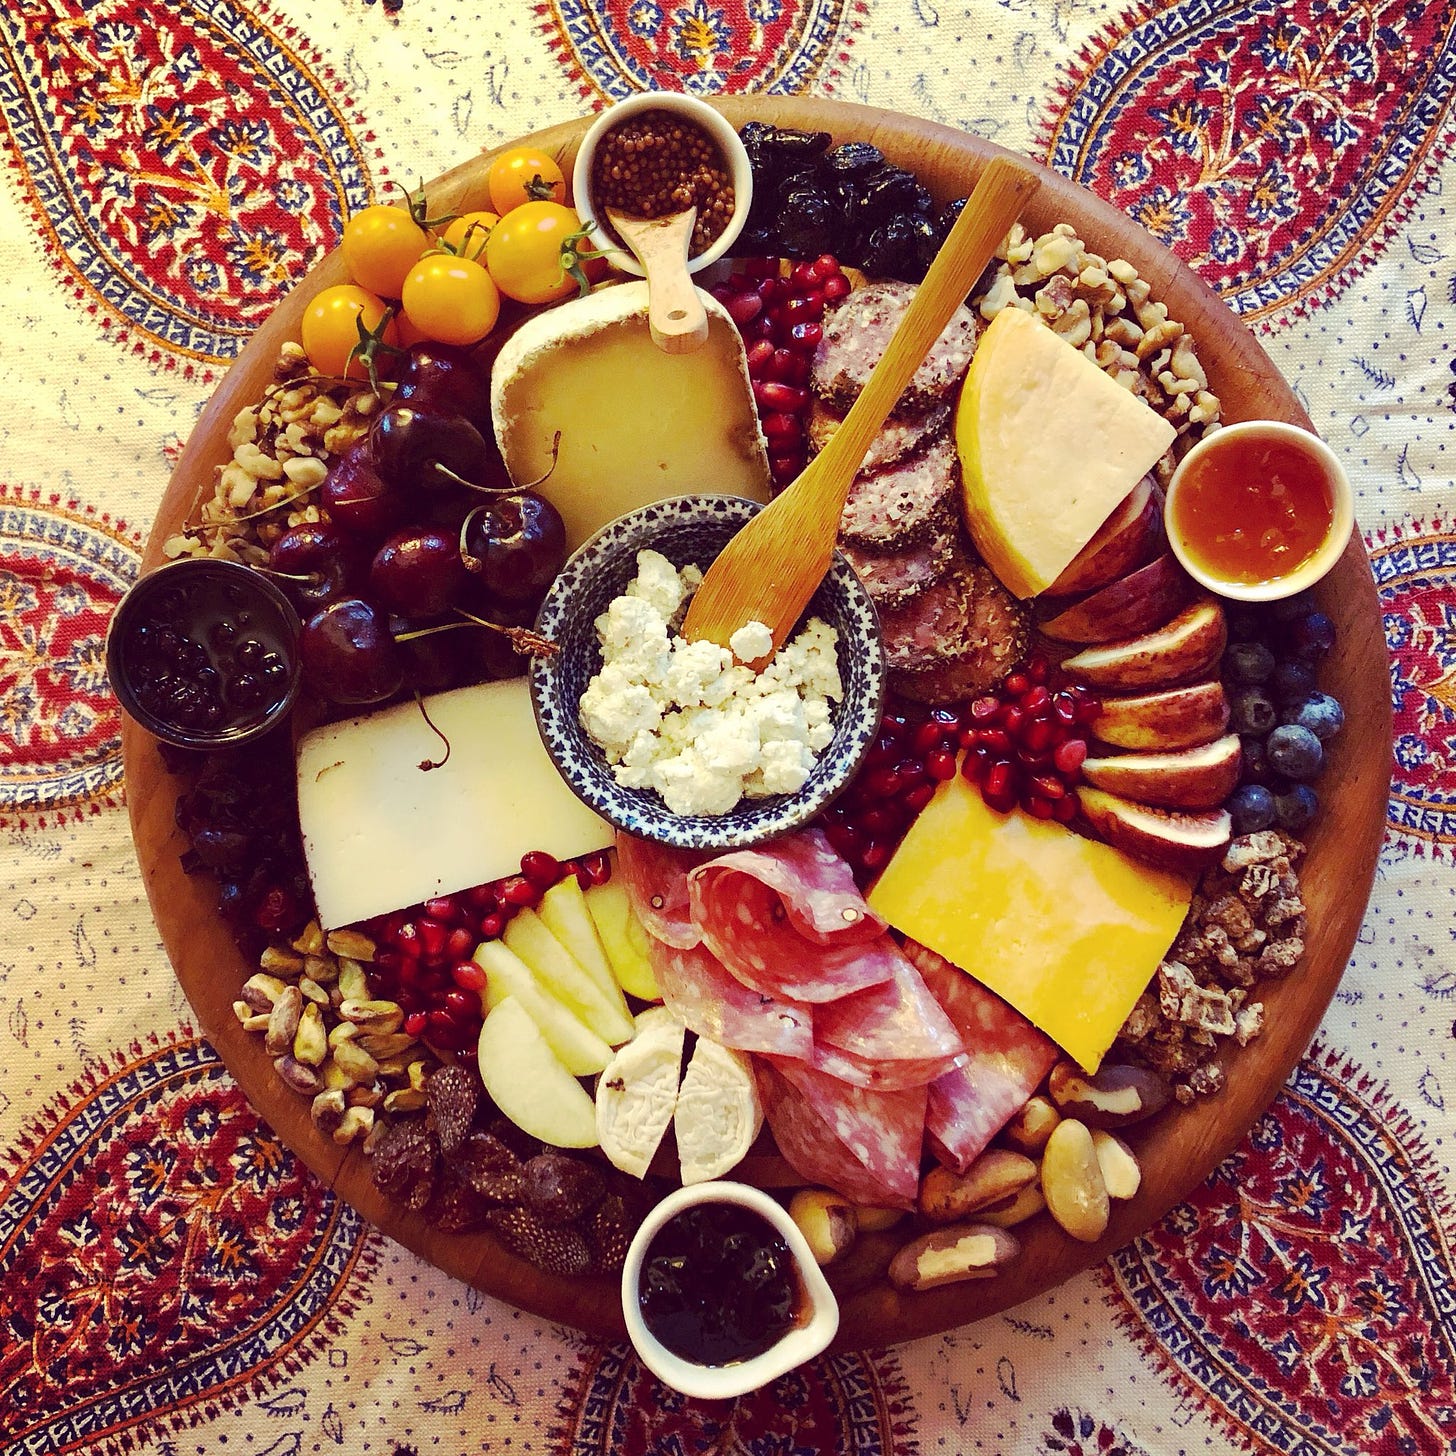 a large round cheese board with cheeses, fruits, meats, and nuts on a persian tablecloth